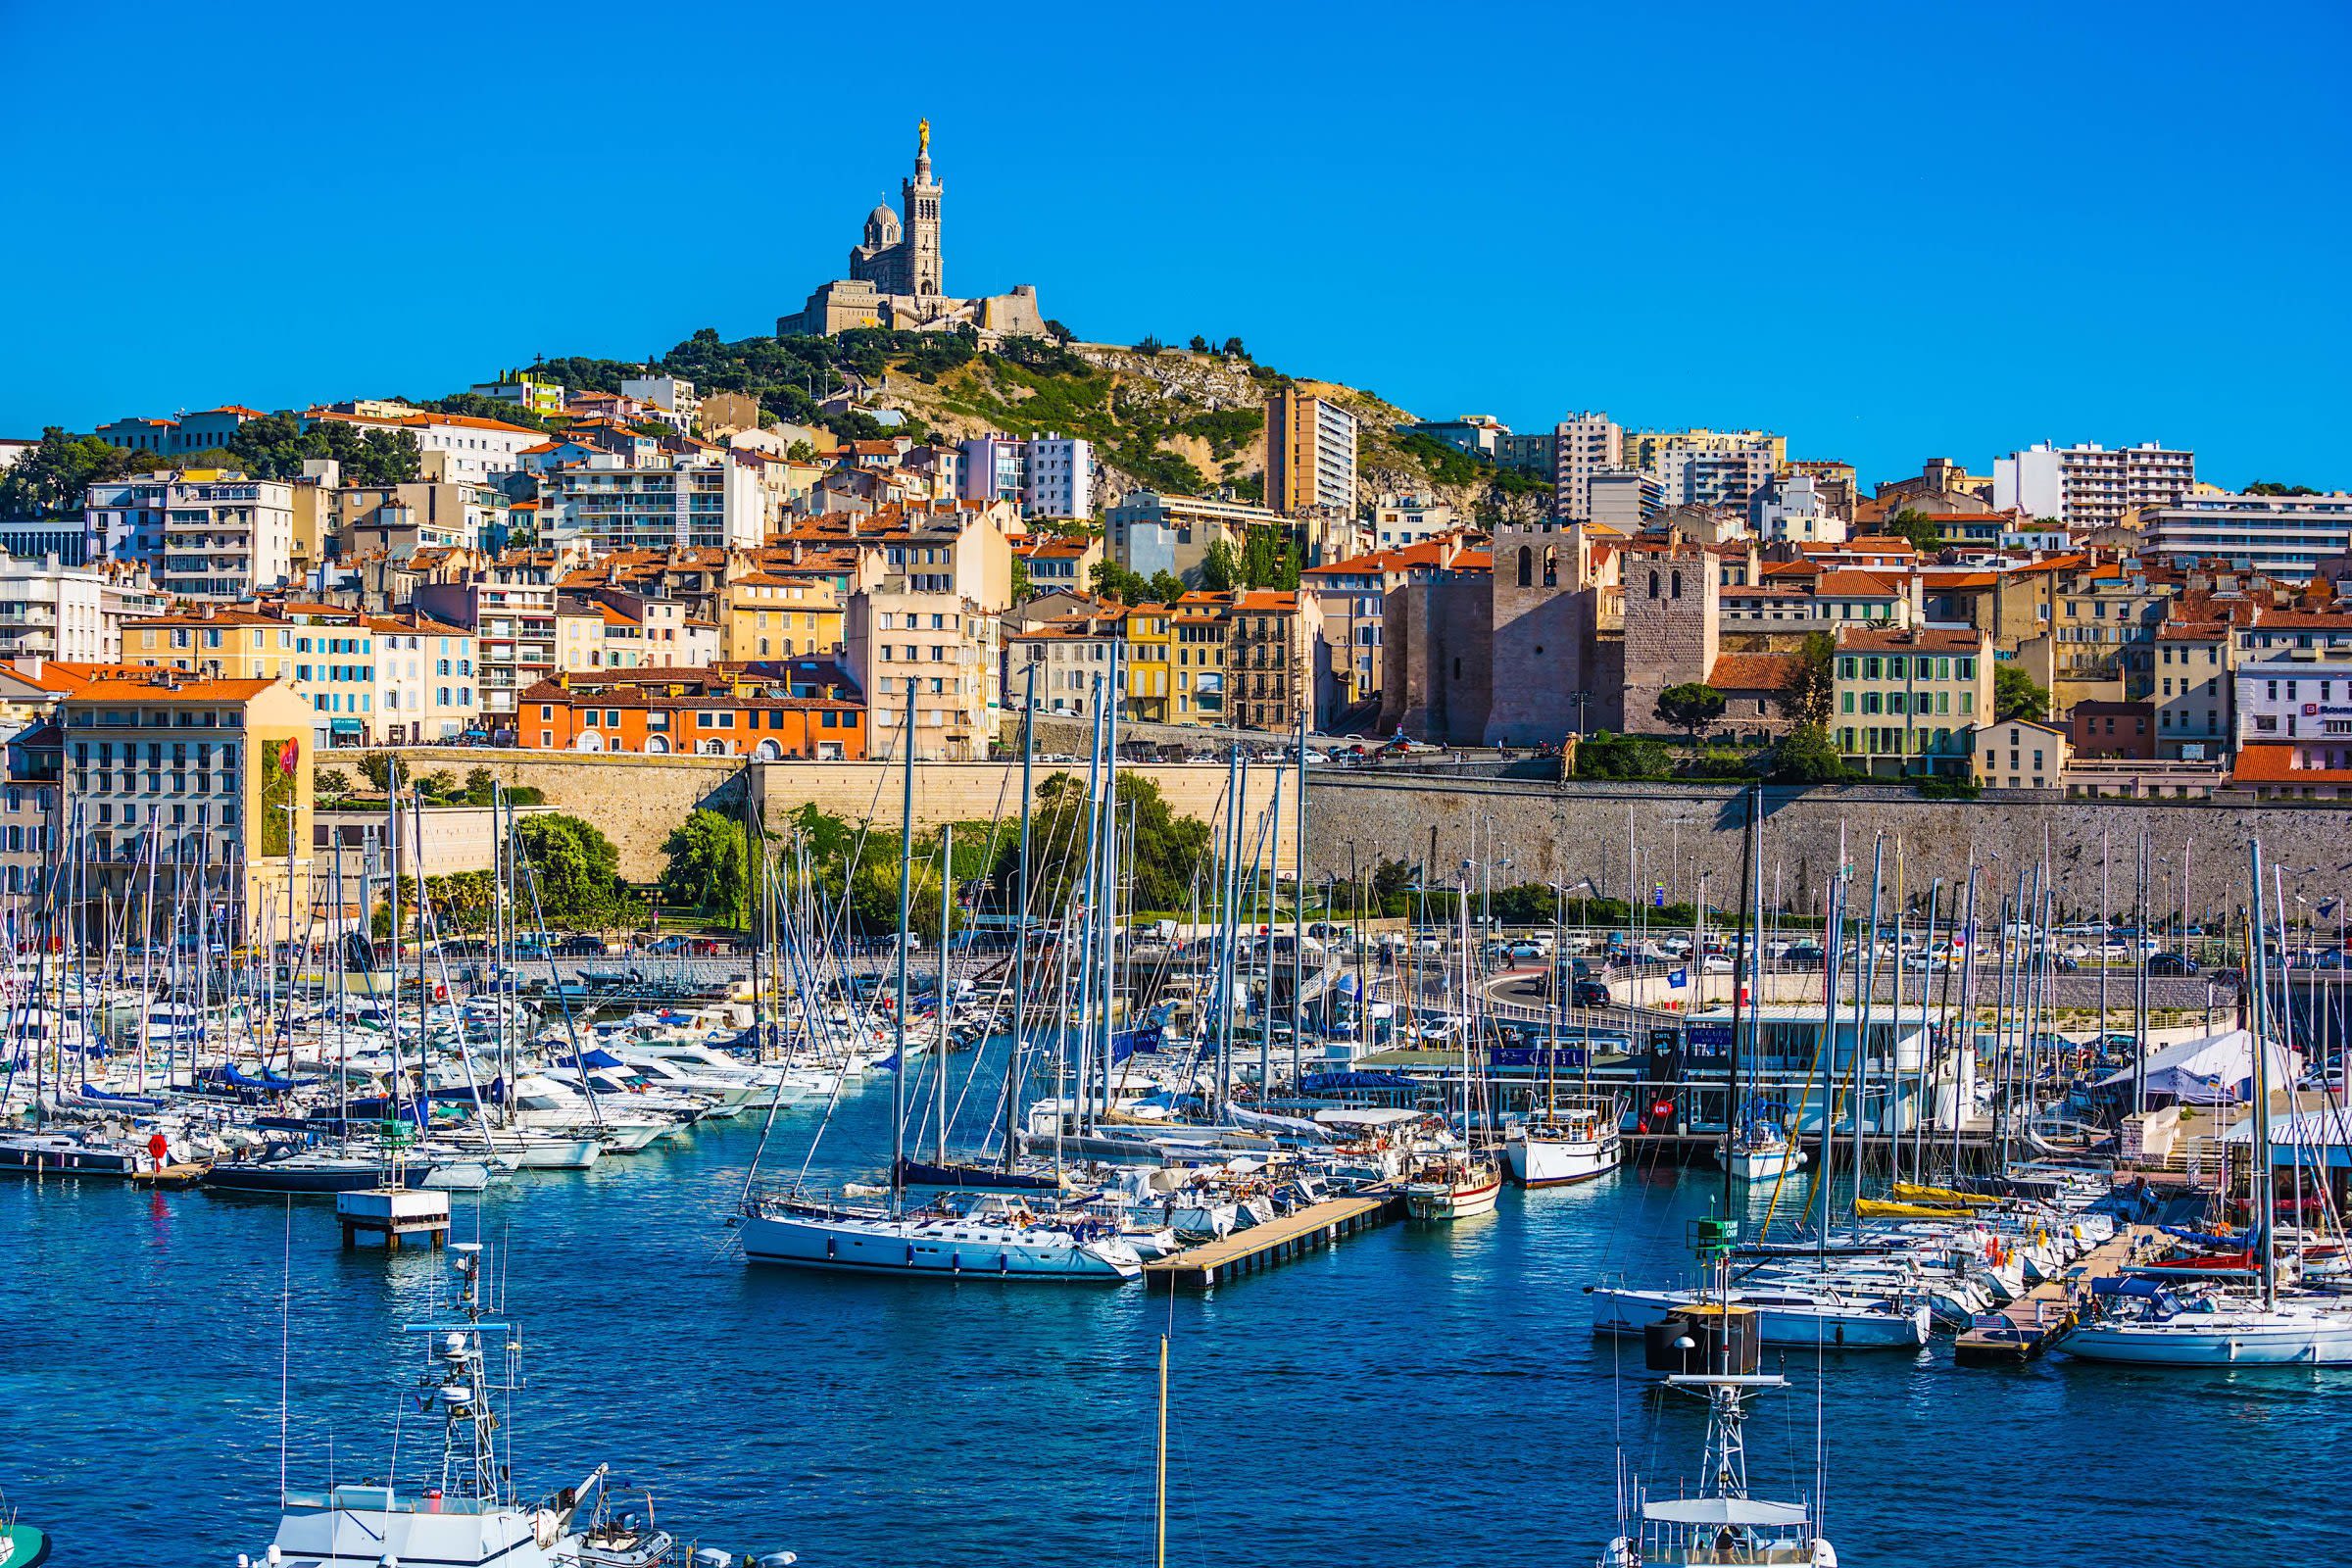 Joyful 10 Nights Tour Packages from Chennai to France